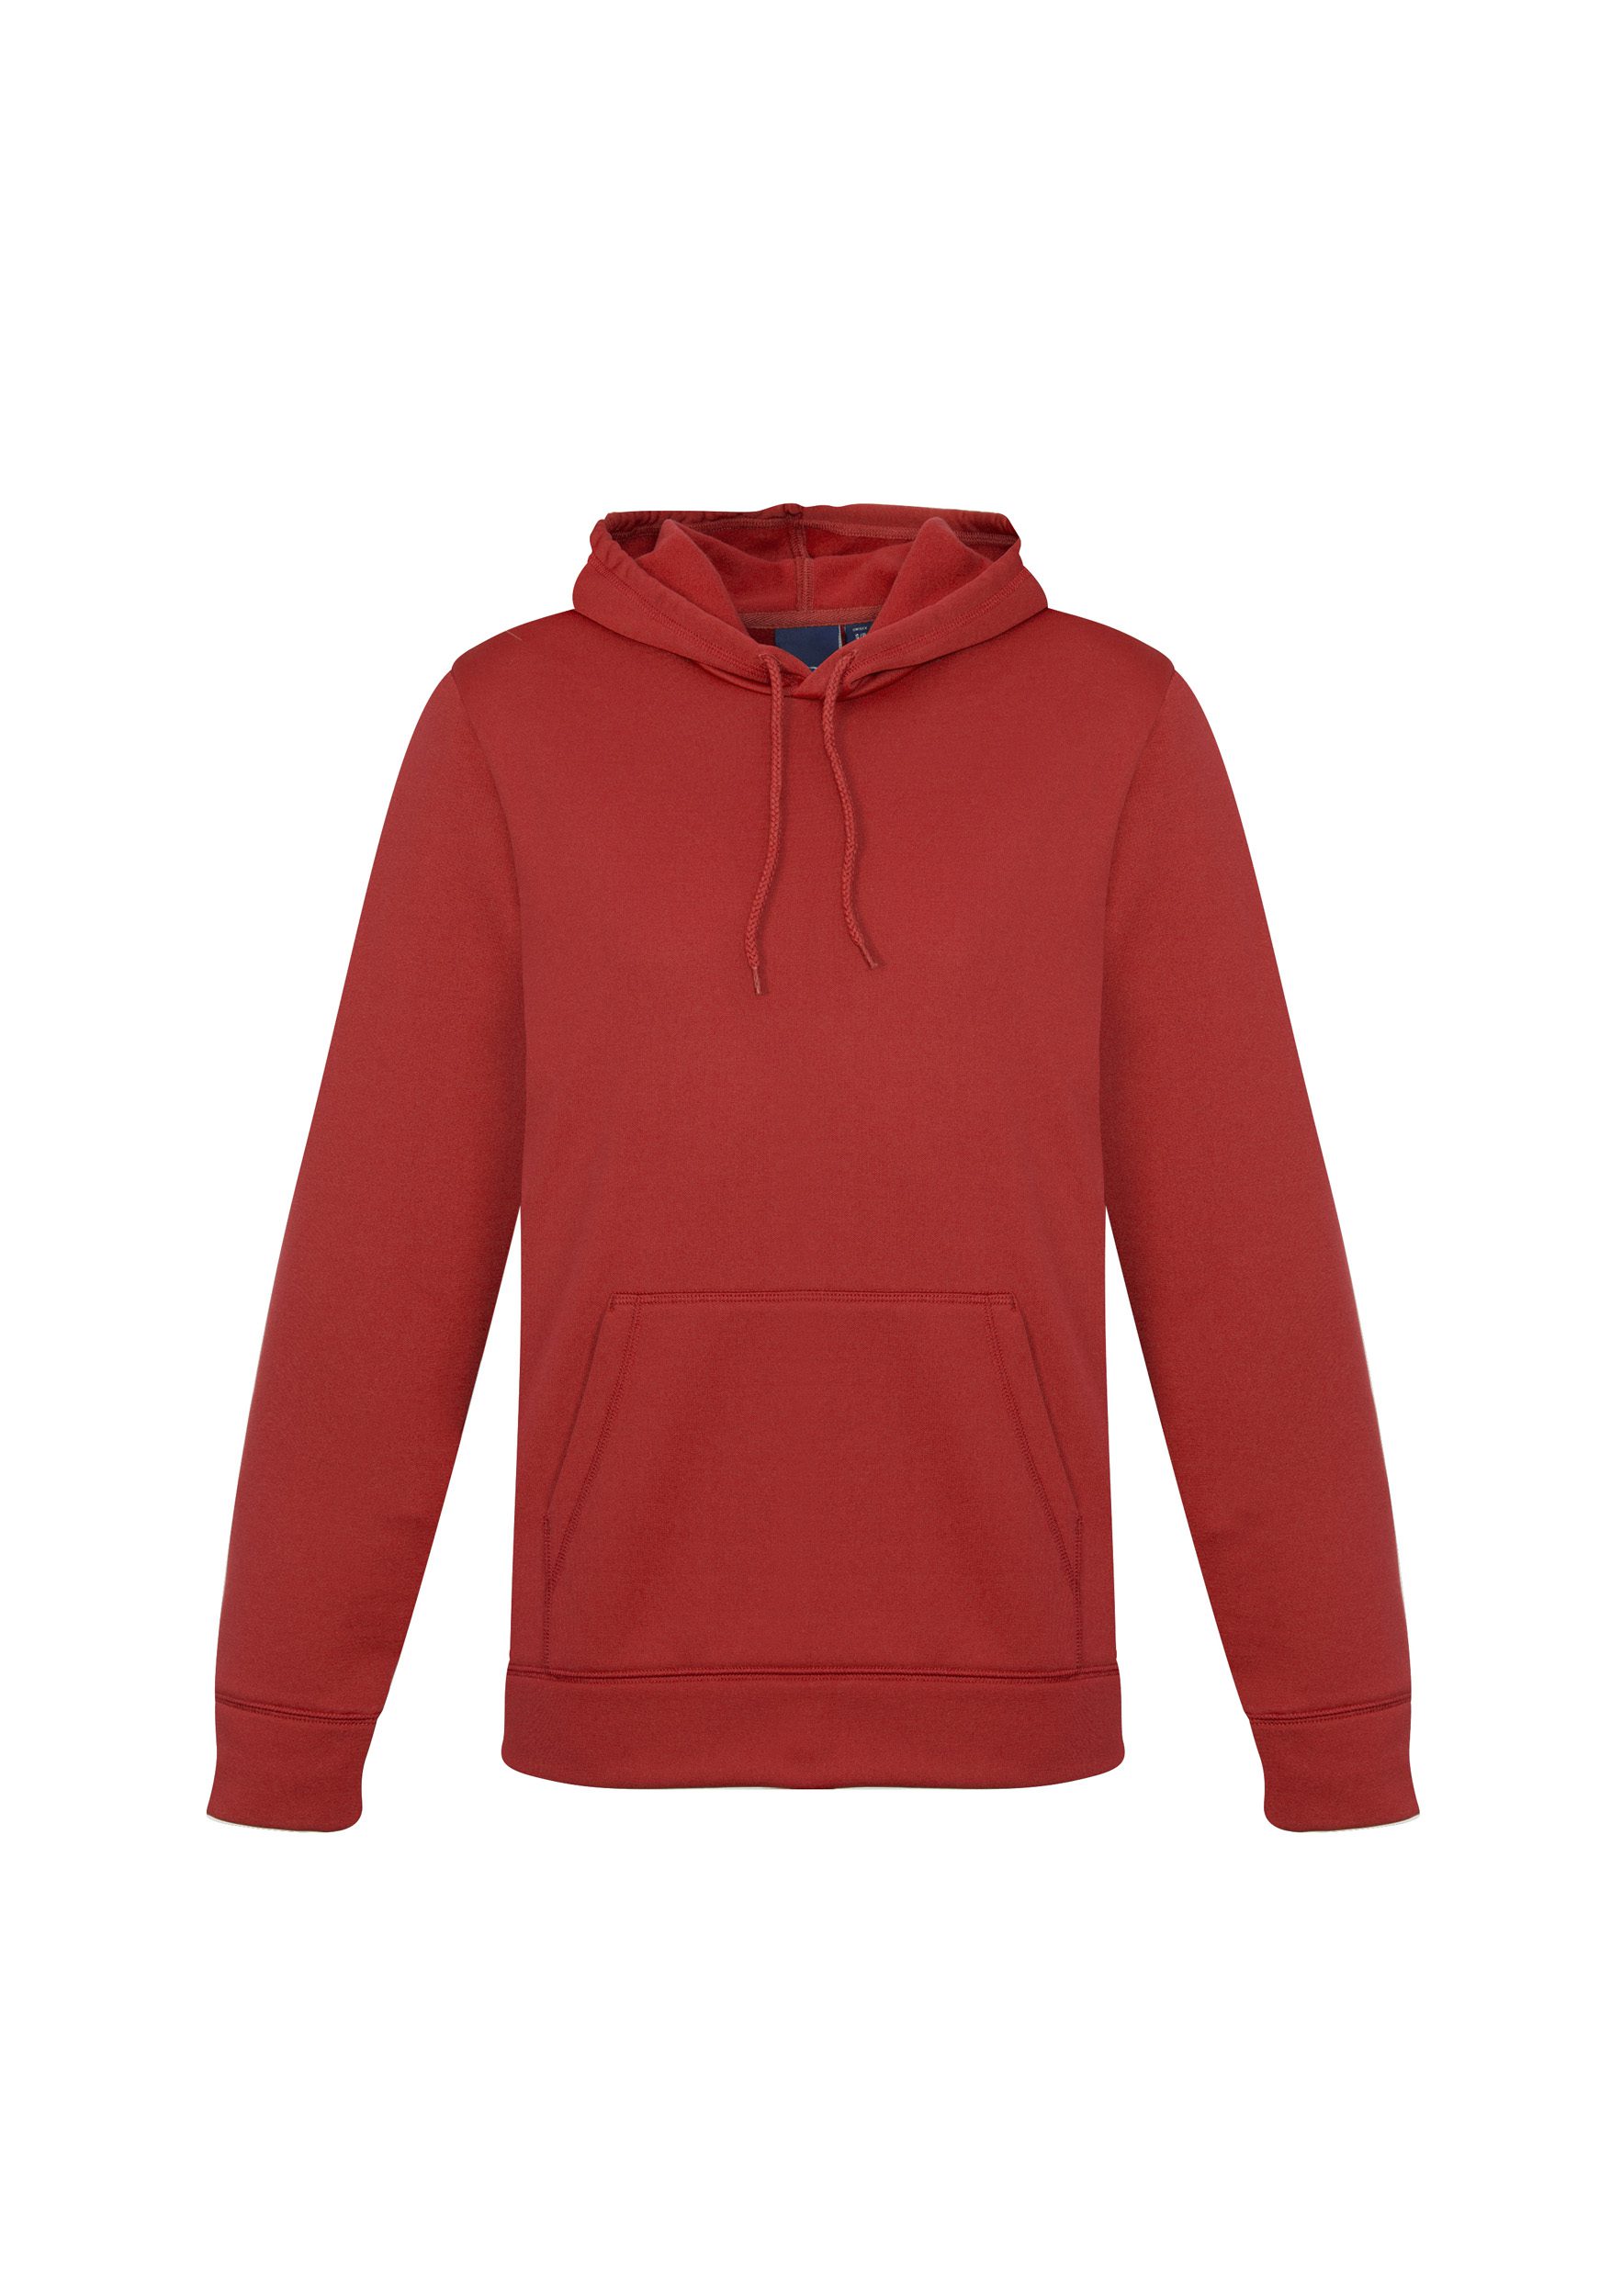 Biz Collection Ladies Hype Pull-On Hoodie #SW239LL Red